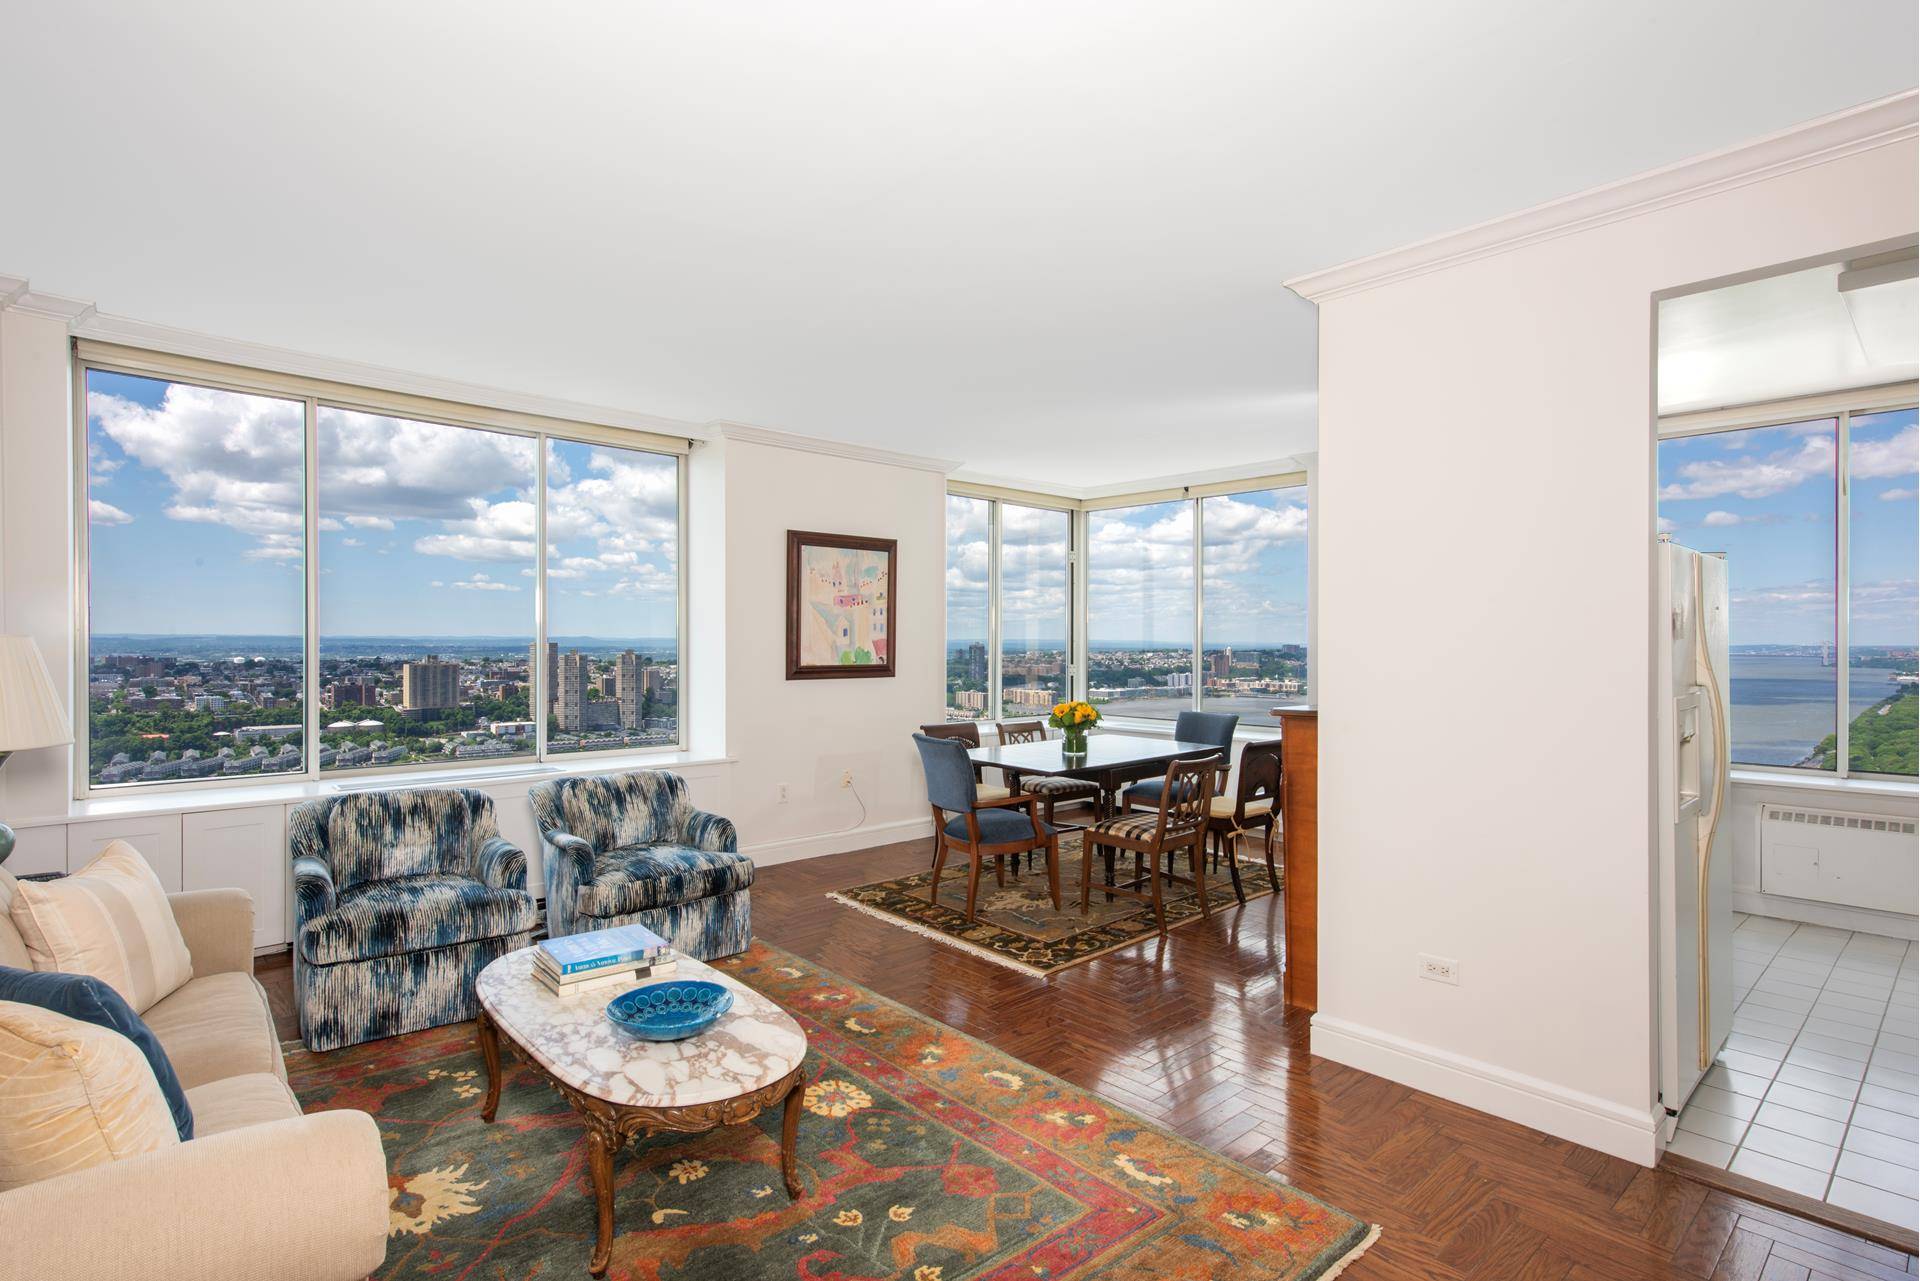 PANORAMIC HUDSON RIVER amp ; SKYLINE VIEWSCreate your penthouse dream with this one of a kind, 2200sqft, 4 bedroom, 4.